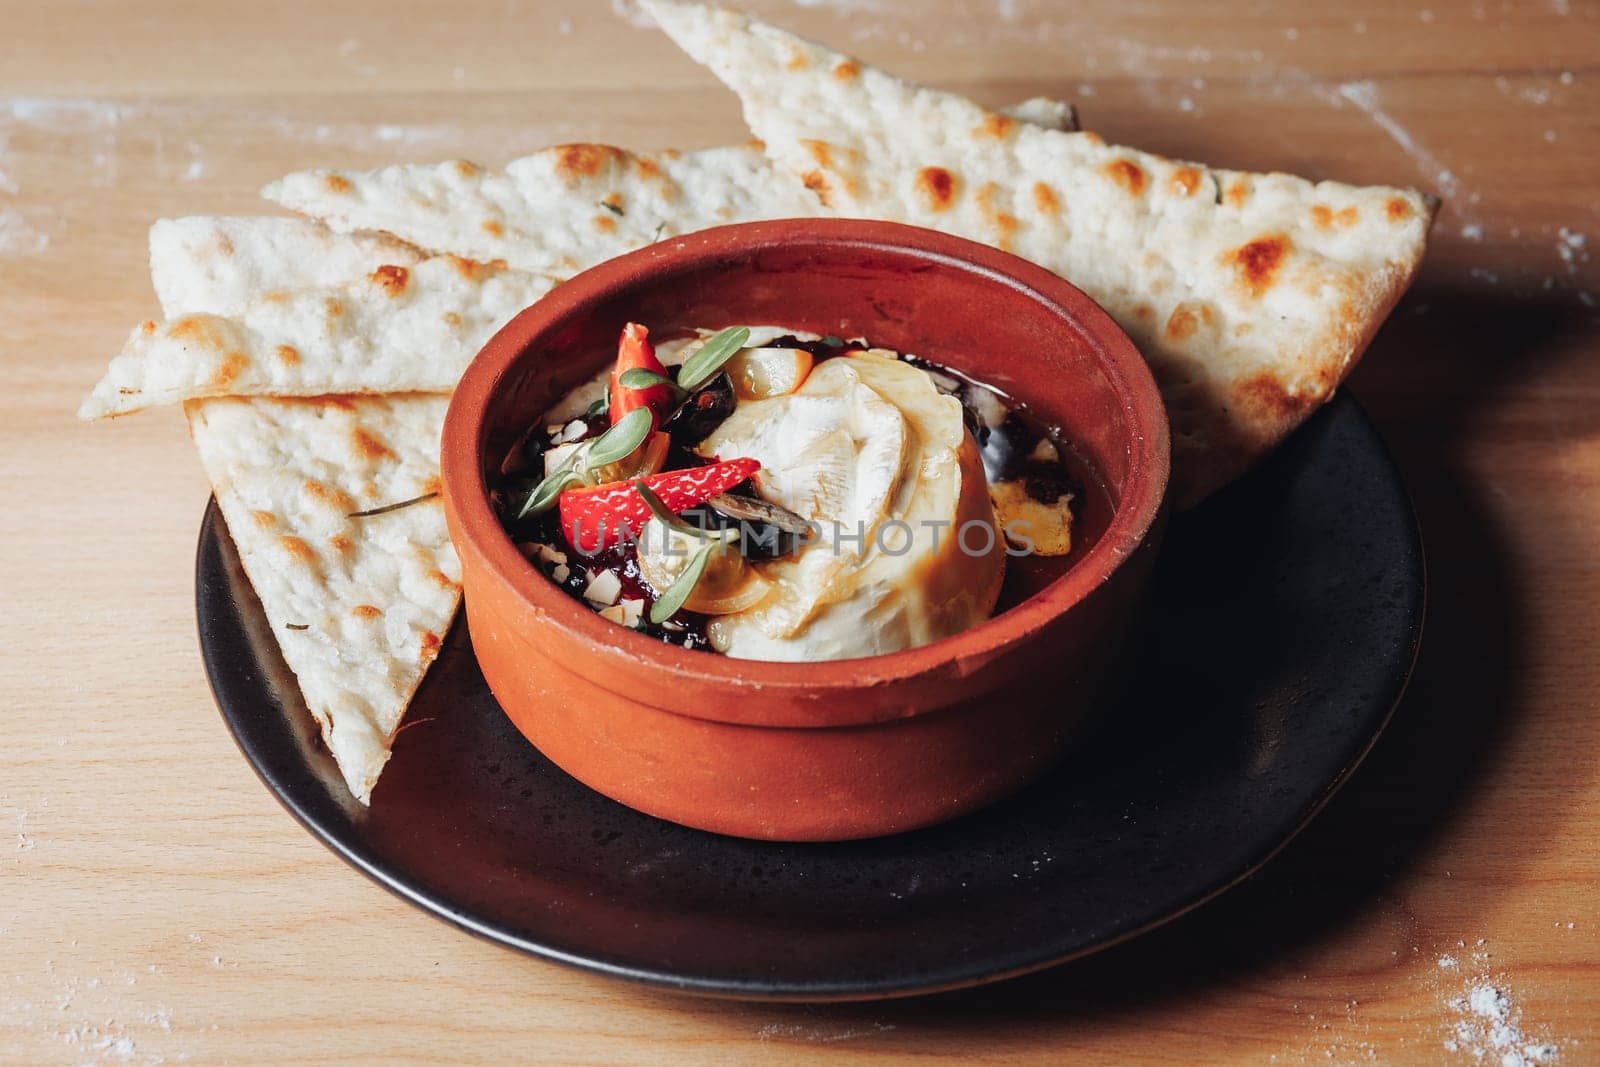 A tantalizing bowl of dip accompanied by fluffy pita bread, placed on a wooden table in a warm ambiance setting.